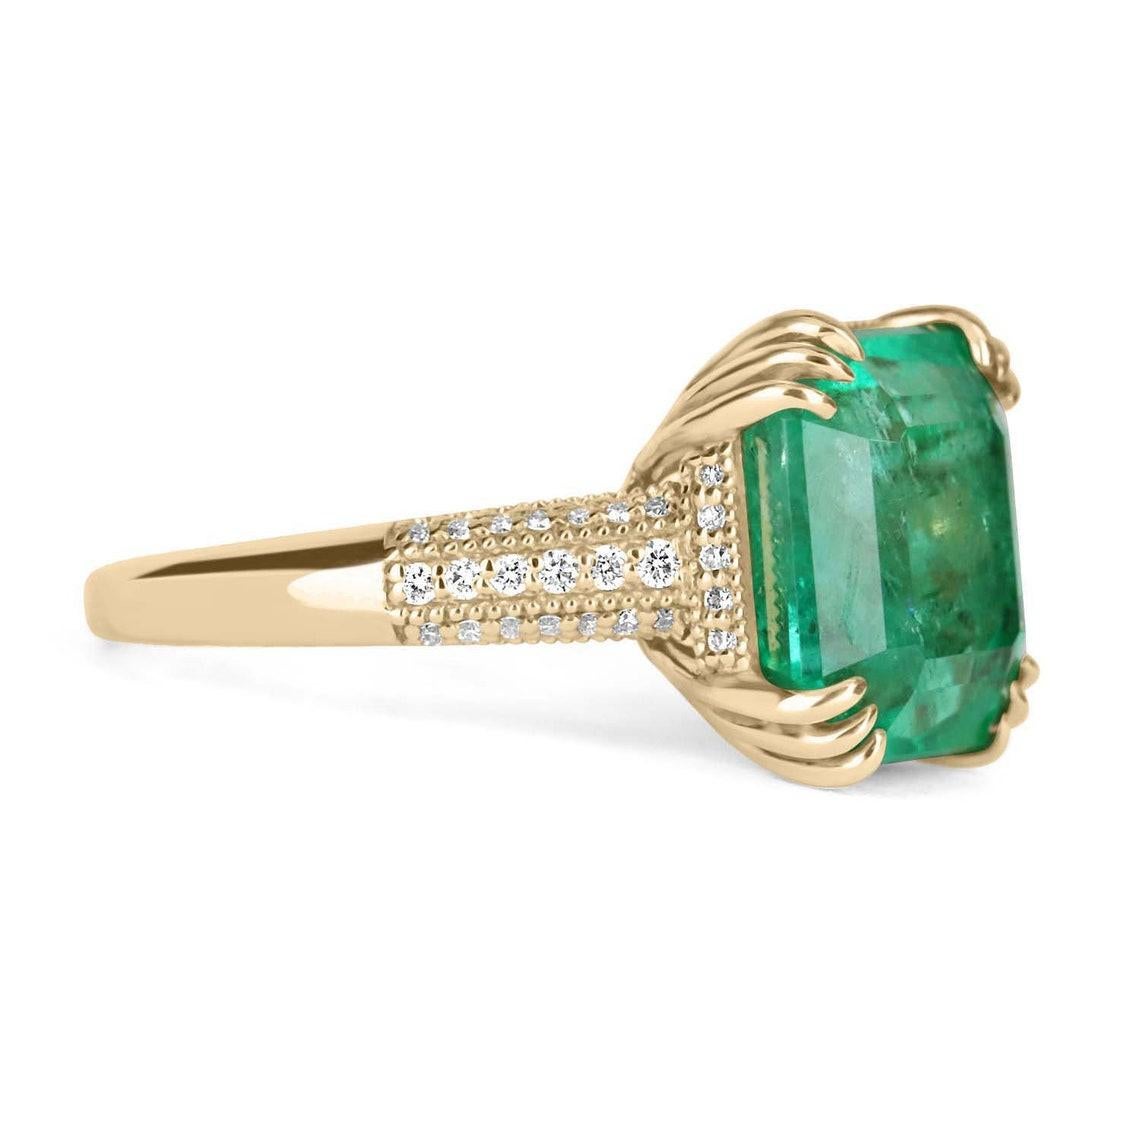 An exceptional Colombian emerald & diamond engagement/anniversary ring. This ring is captivating from every angle. Incredible diamonds highlight the side of the emerald and the shank. The emerald has vivid, vivacious green color and very good